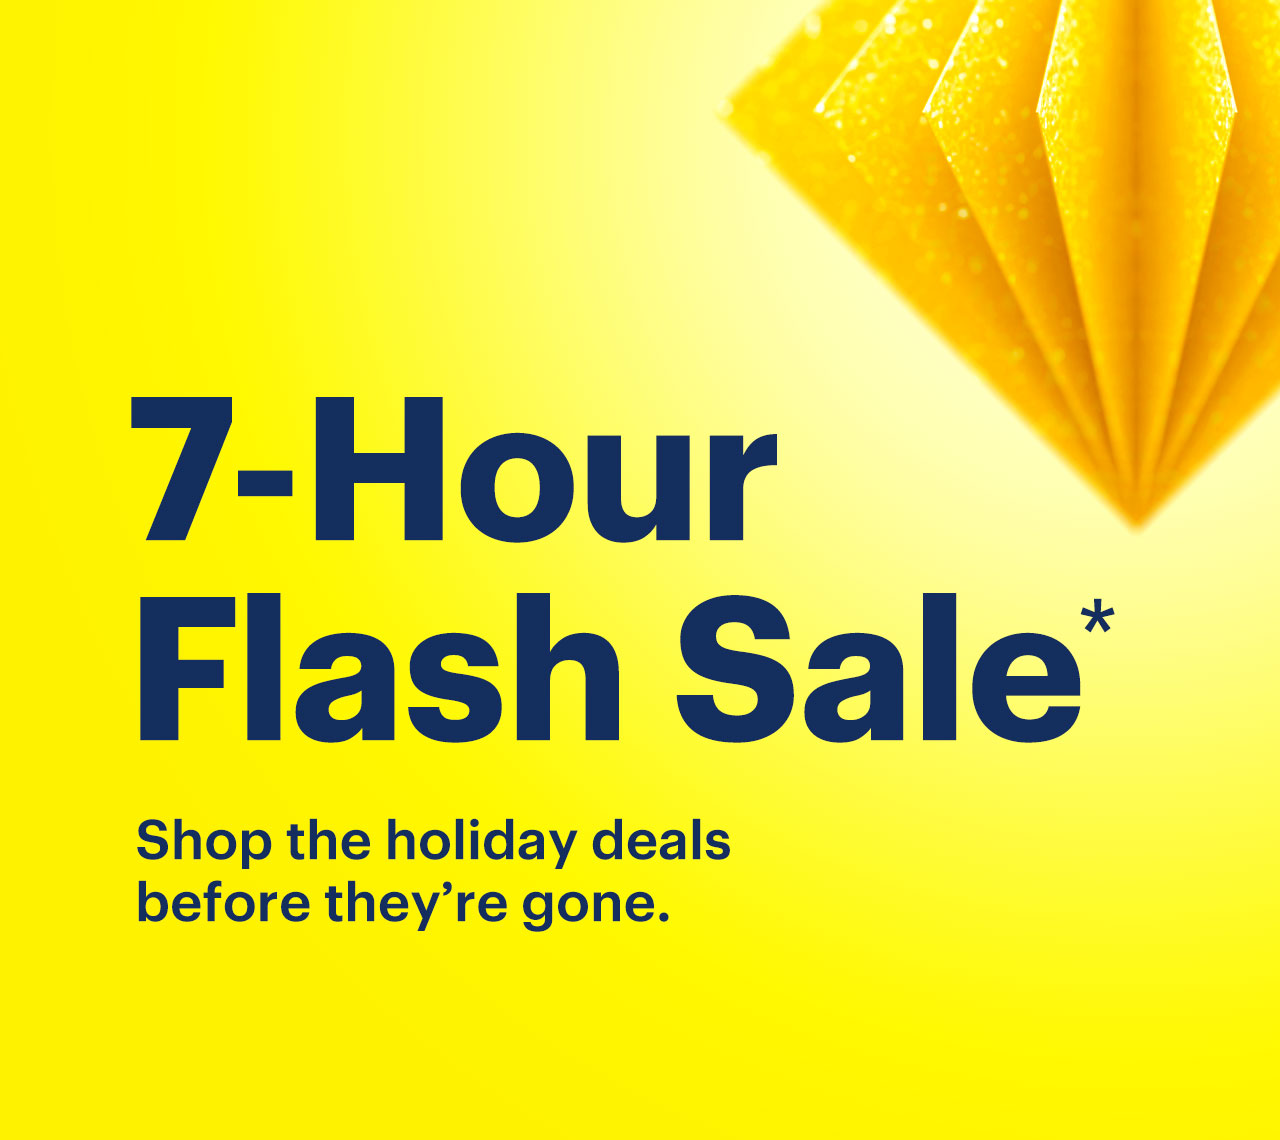 7-Hour Flash Sale. Shop the holiday deals before they're gone. Reference disclaimer.